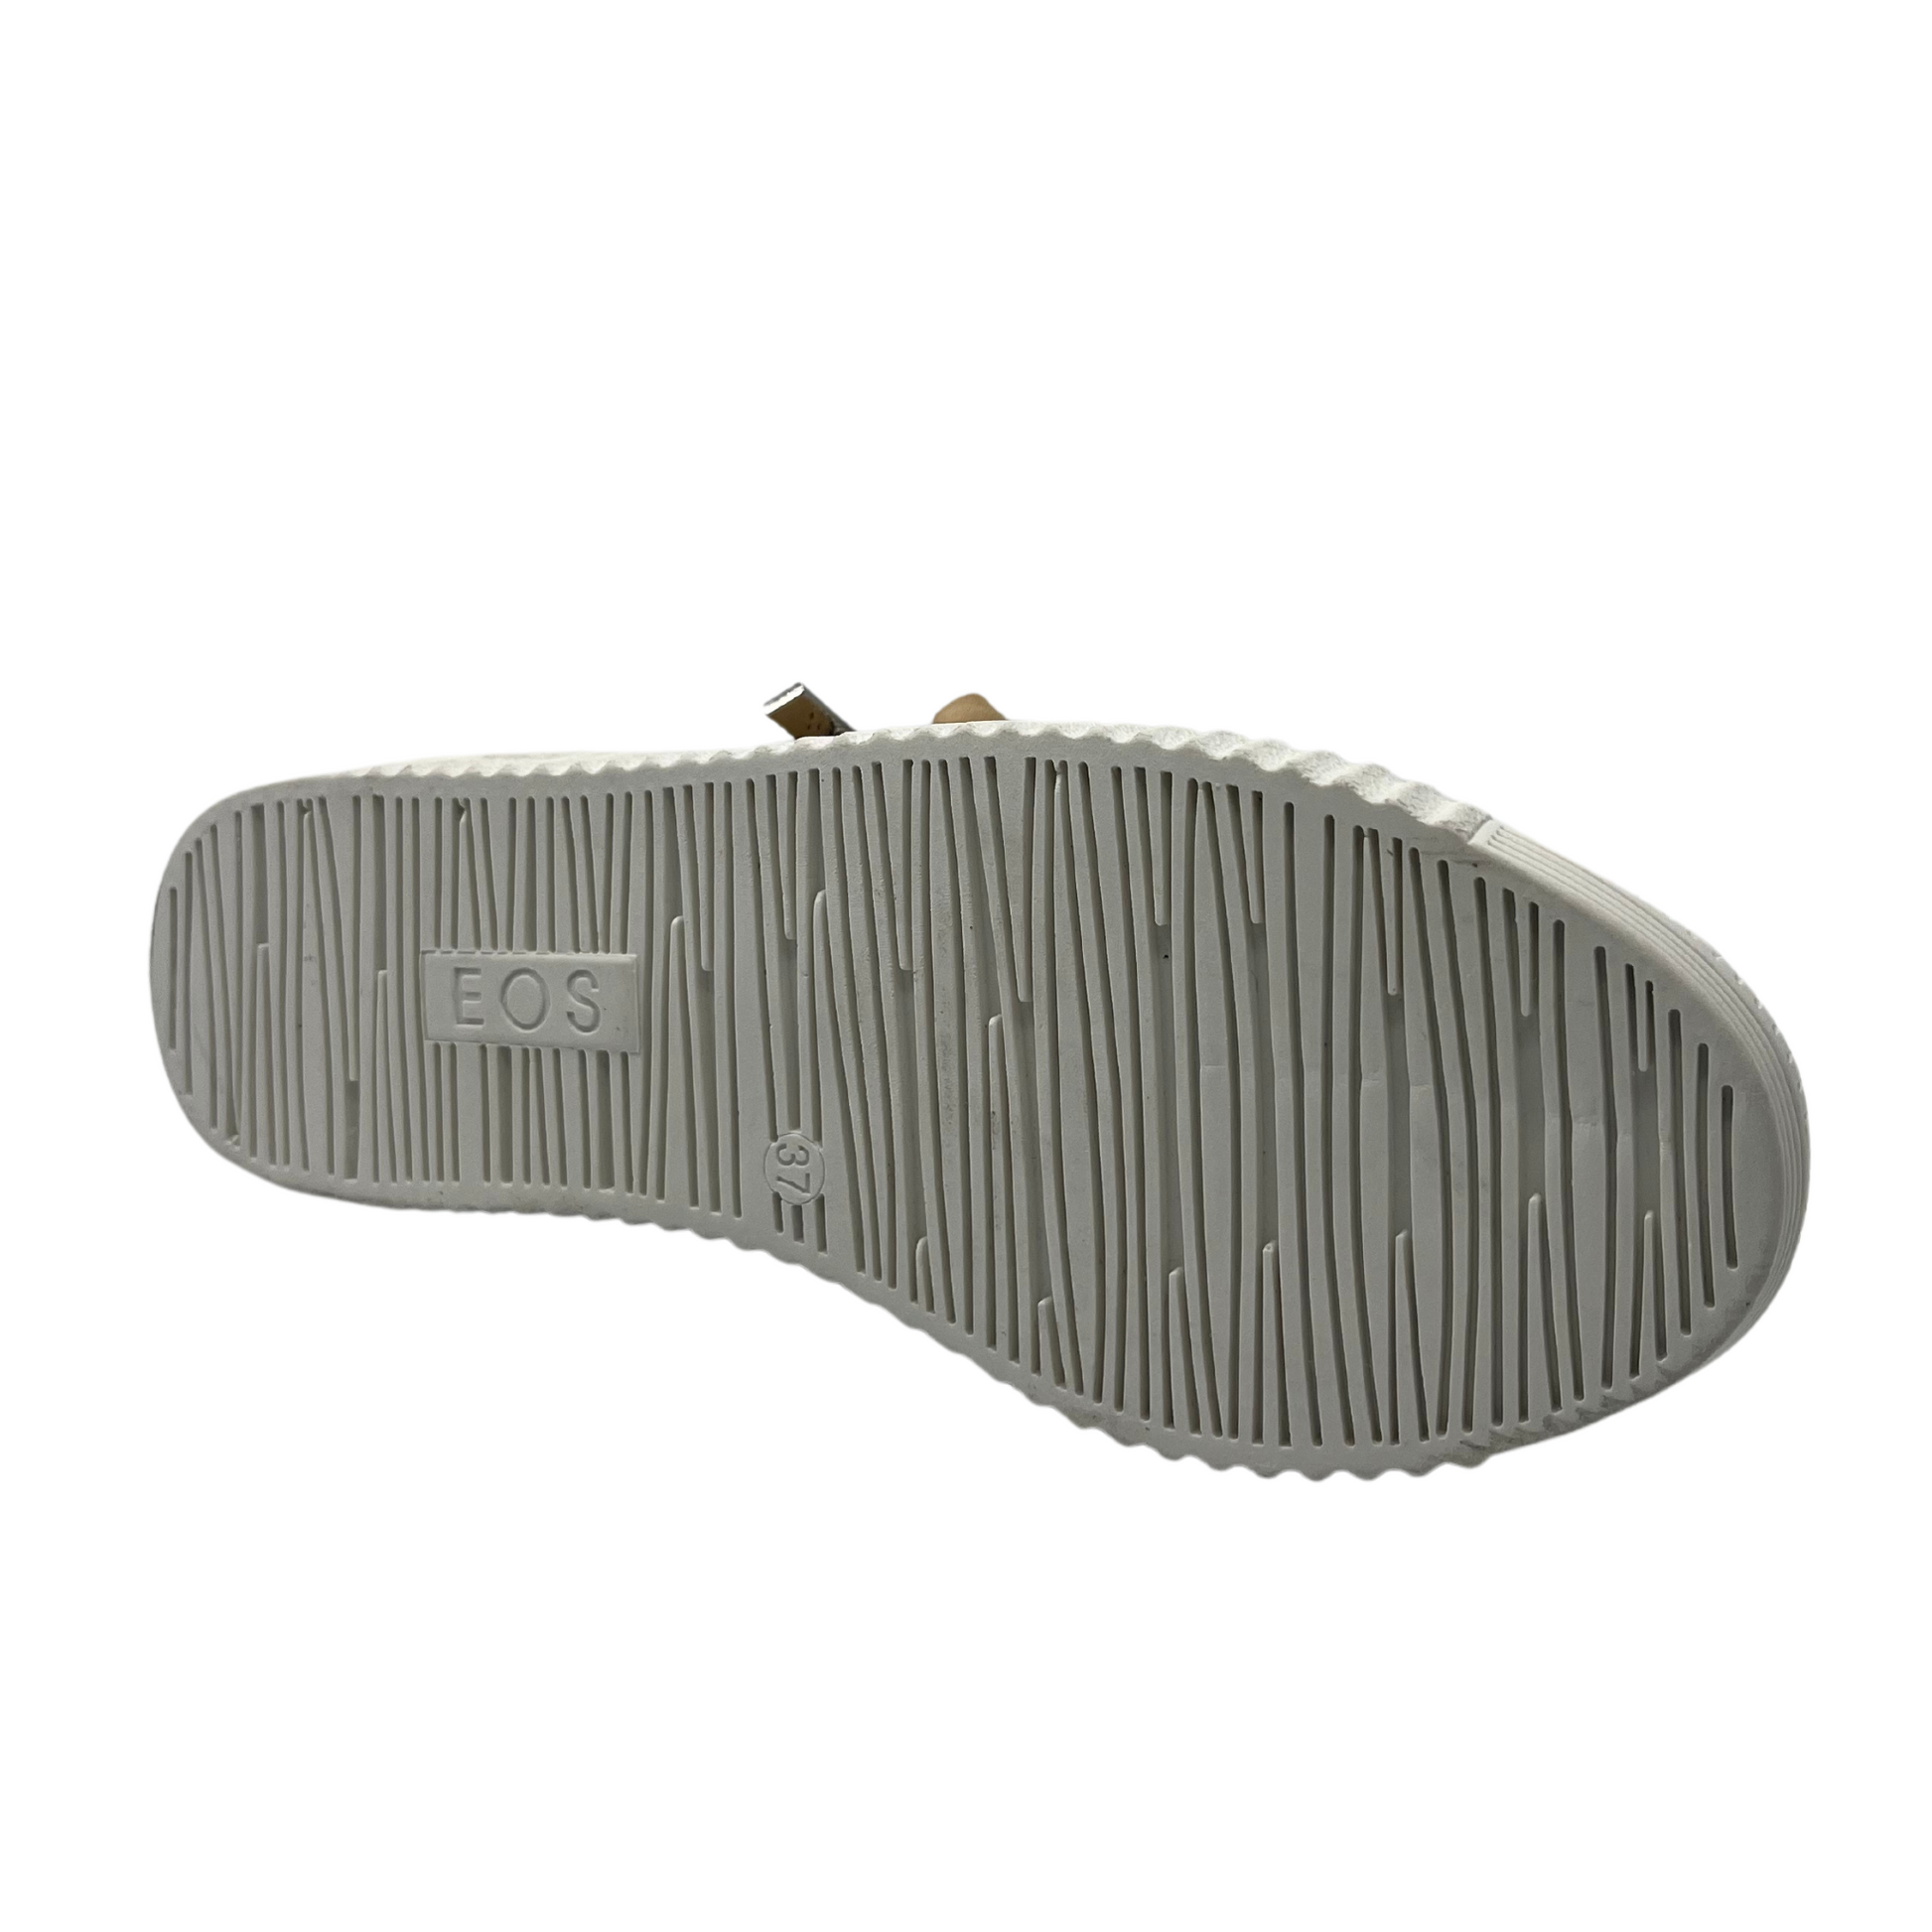 Bottom view of nude leather sneaker with white rubber outsole